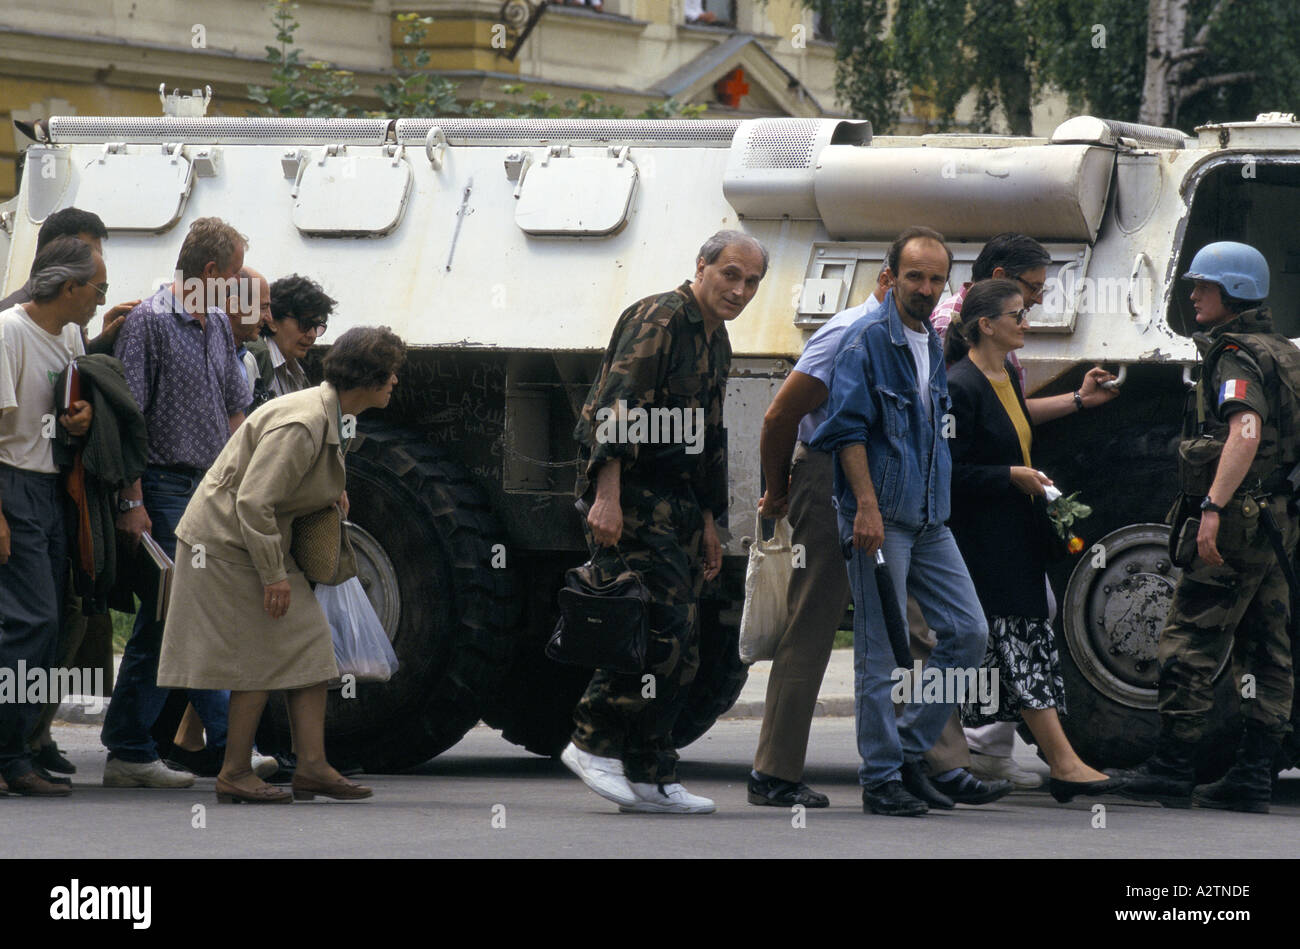 sarajevo june 1995 un tank soldier shielding people as they cross sniper susceptible roads Stock Photo